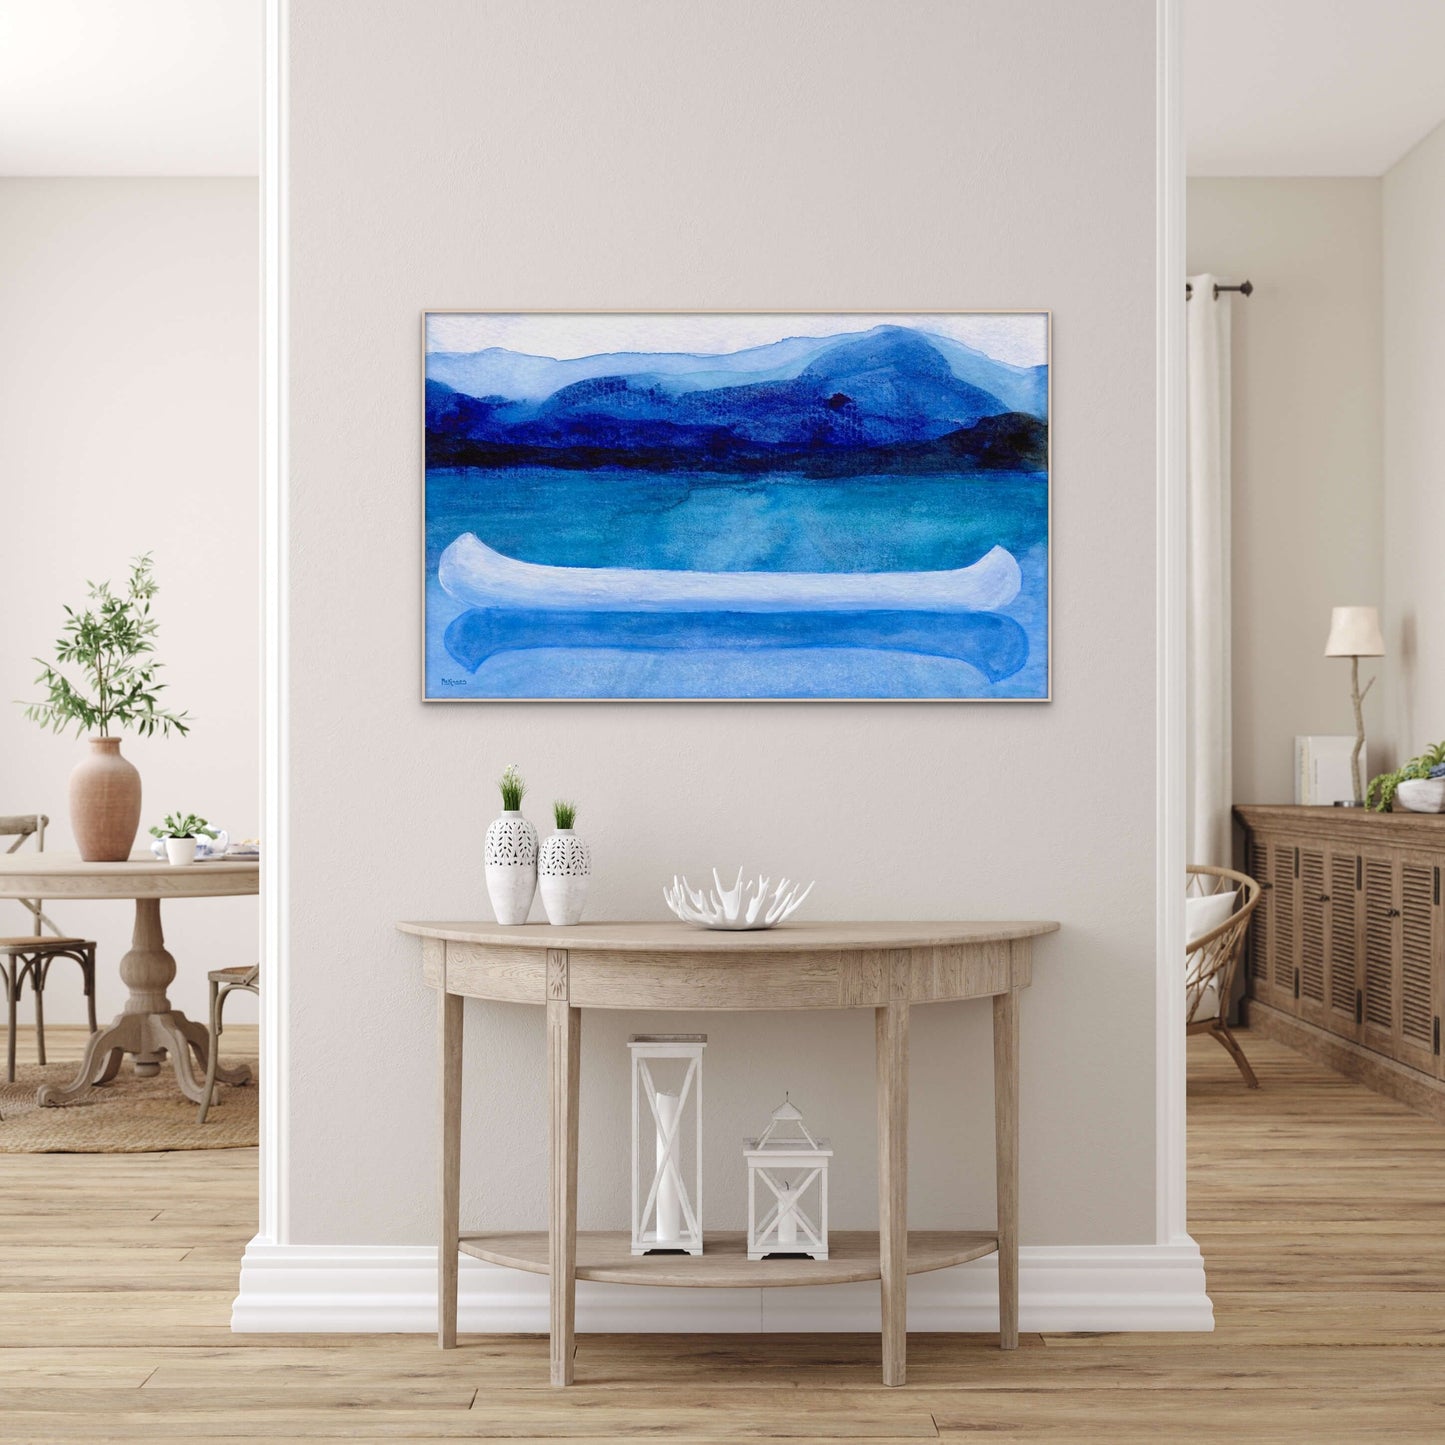 A work of canoeing art by Canadian artist Catherine McKinnon. The watercolor depicts a small white boat, a "canoe", on blue water with a dark blue distant shore and lighter blue distant moutains. The giclee print is framed in light-colored wood and is mounted on a light gray wall.